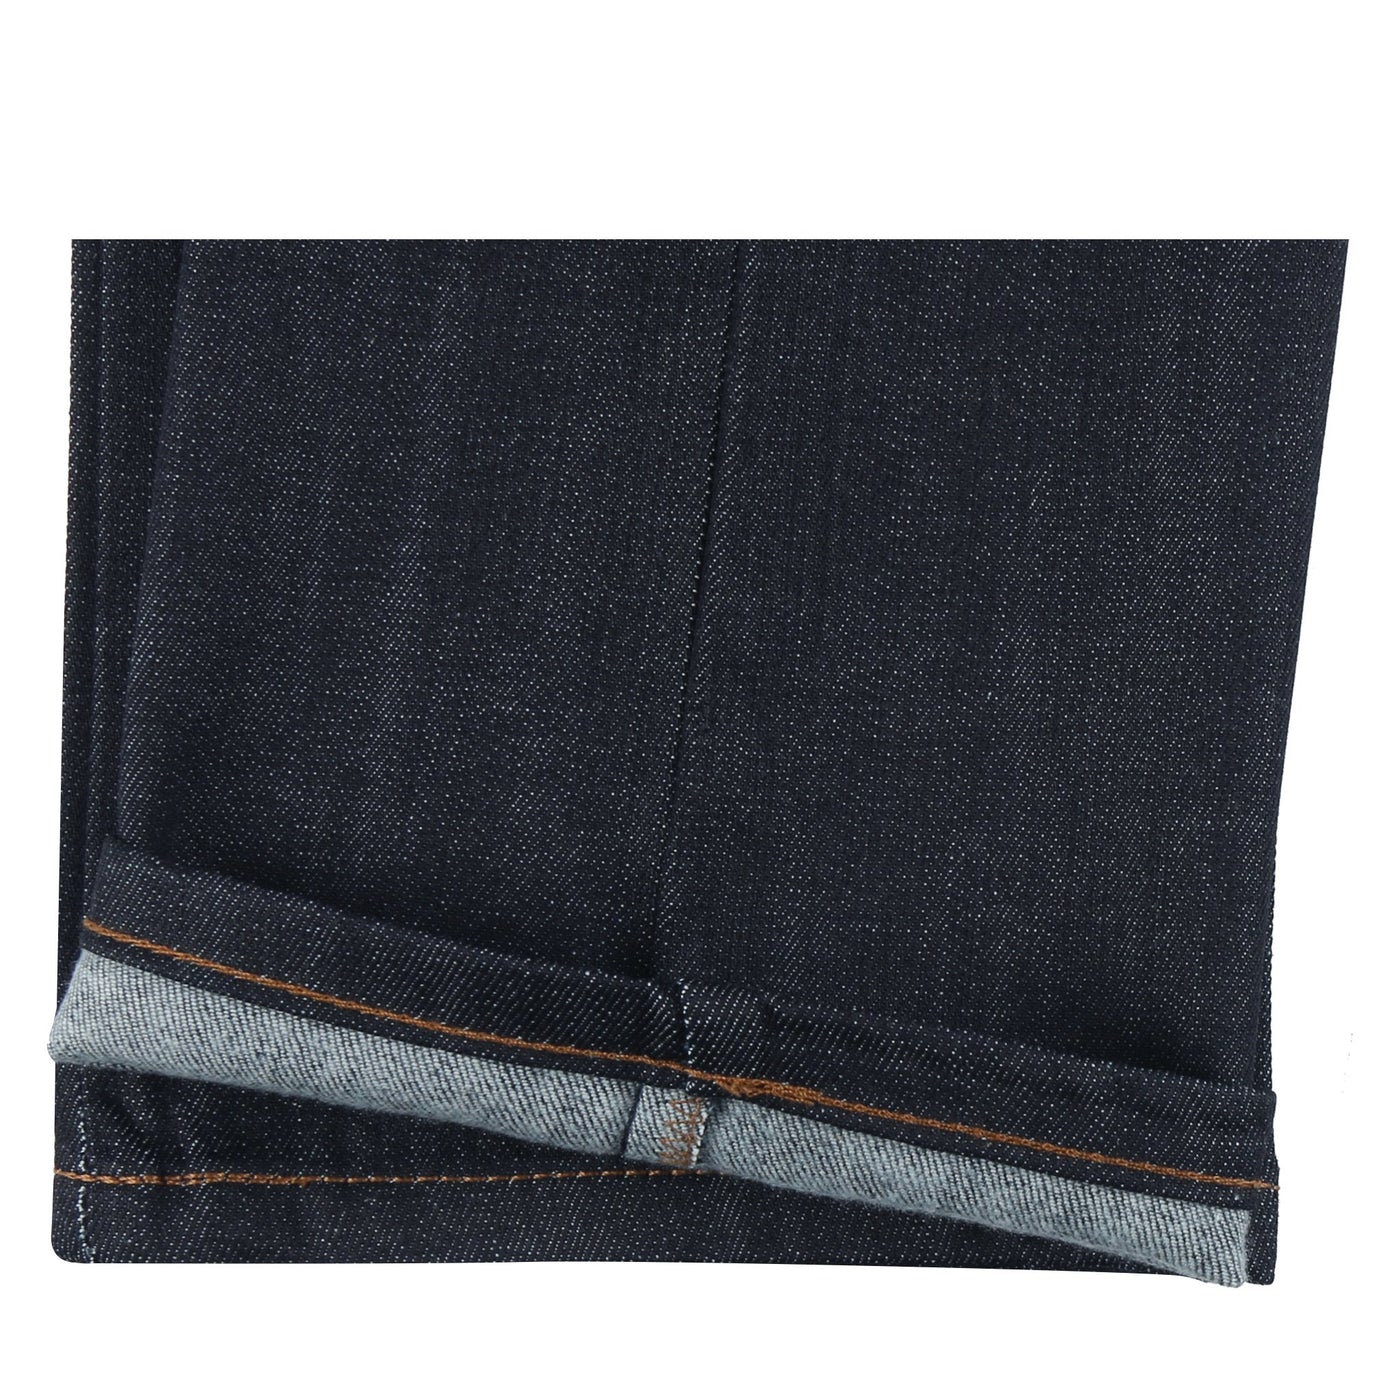 Naked and Famous-Weird Guy-Cashmere Blend Denim - Black Riot HK